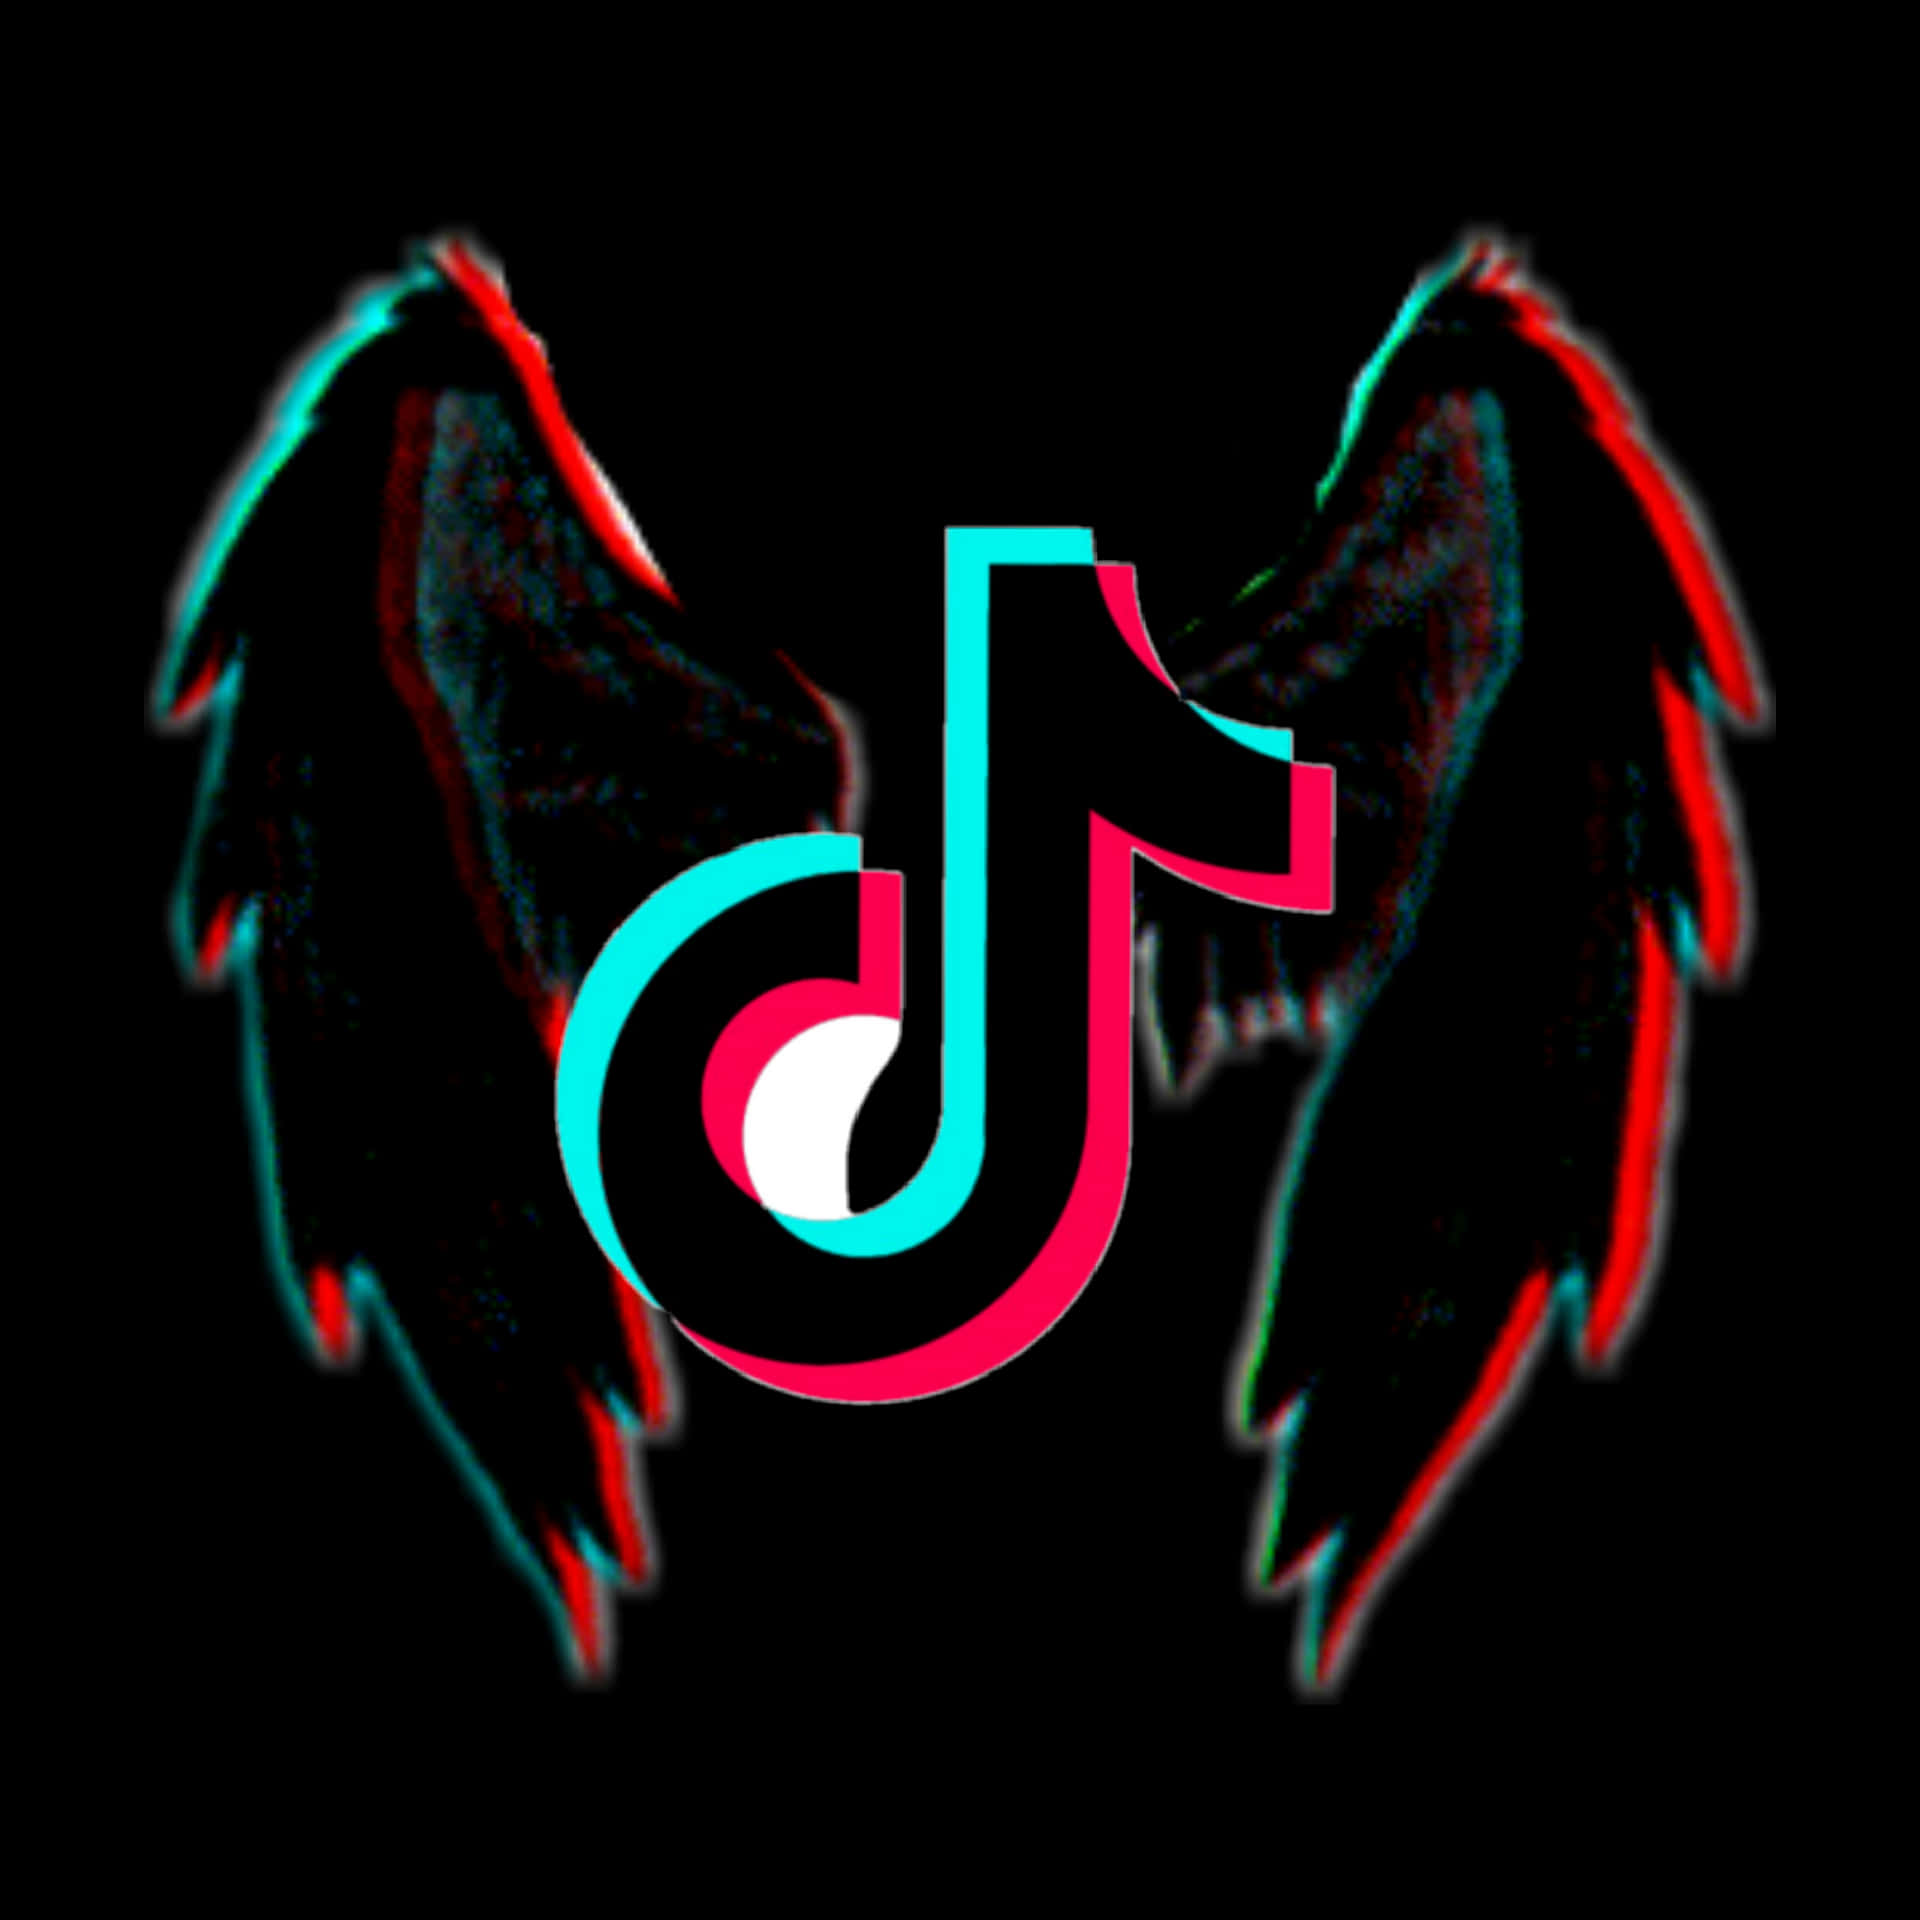 tiktok logo with wings on a black background